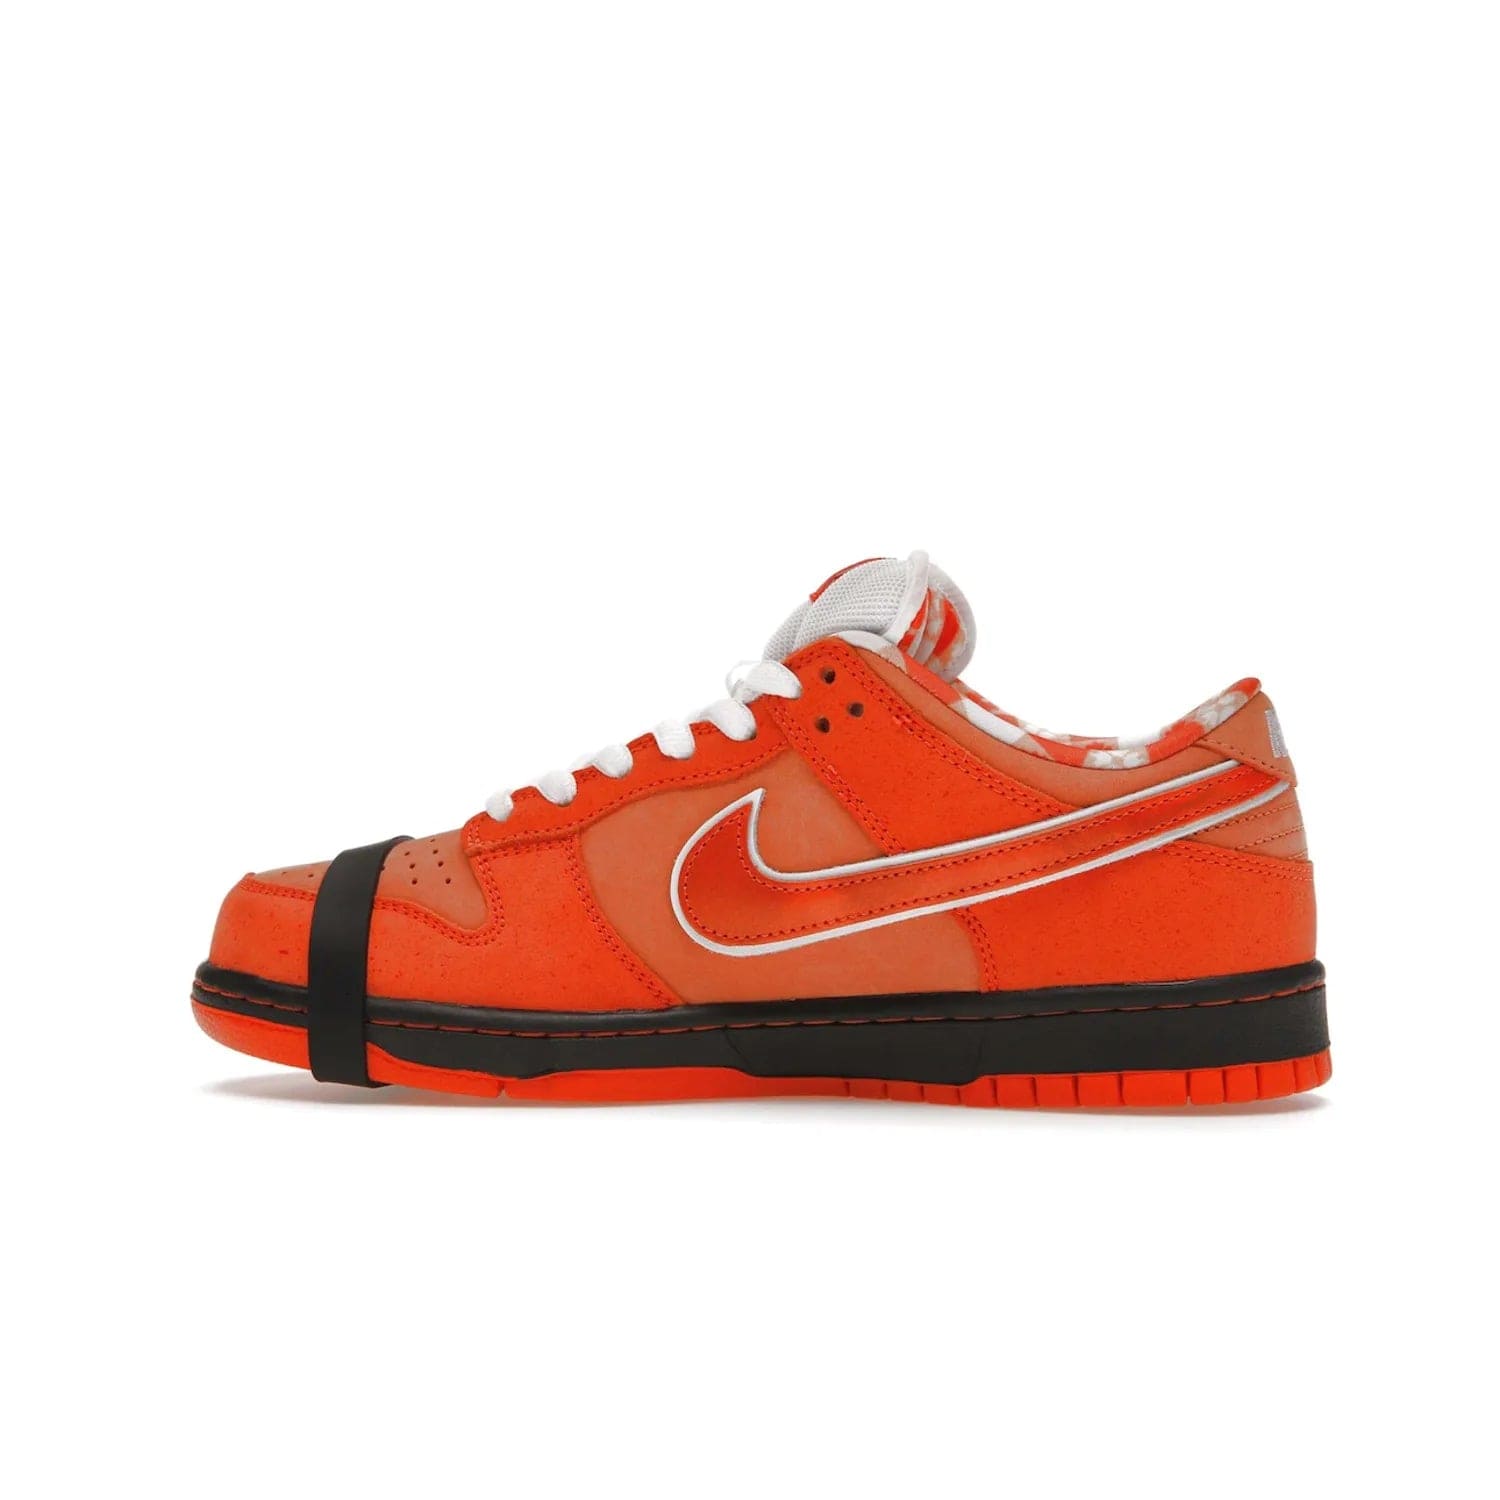 Nike SB Dunk Low Concepts Orange Lobster - Image 20 - Only at www.BallersClubKickz.com - Limited Nike SB Dunk Low Concepts Orange Lobster features premium nubuck upper with vibrant oranges for eye-catching colorblocked design. Signature Nike SB tag and bib-inspired interior for added texture. Outsole and cupsole provide extra reinforcement. Get it 12/20/2022.